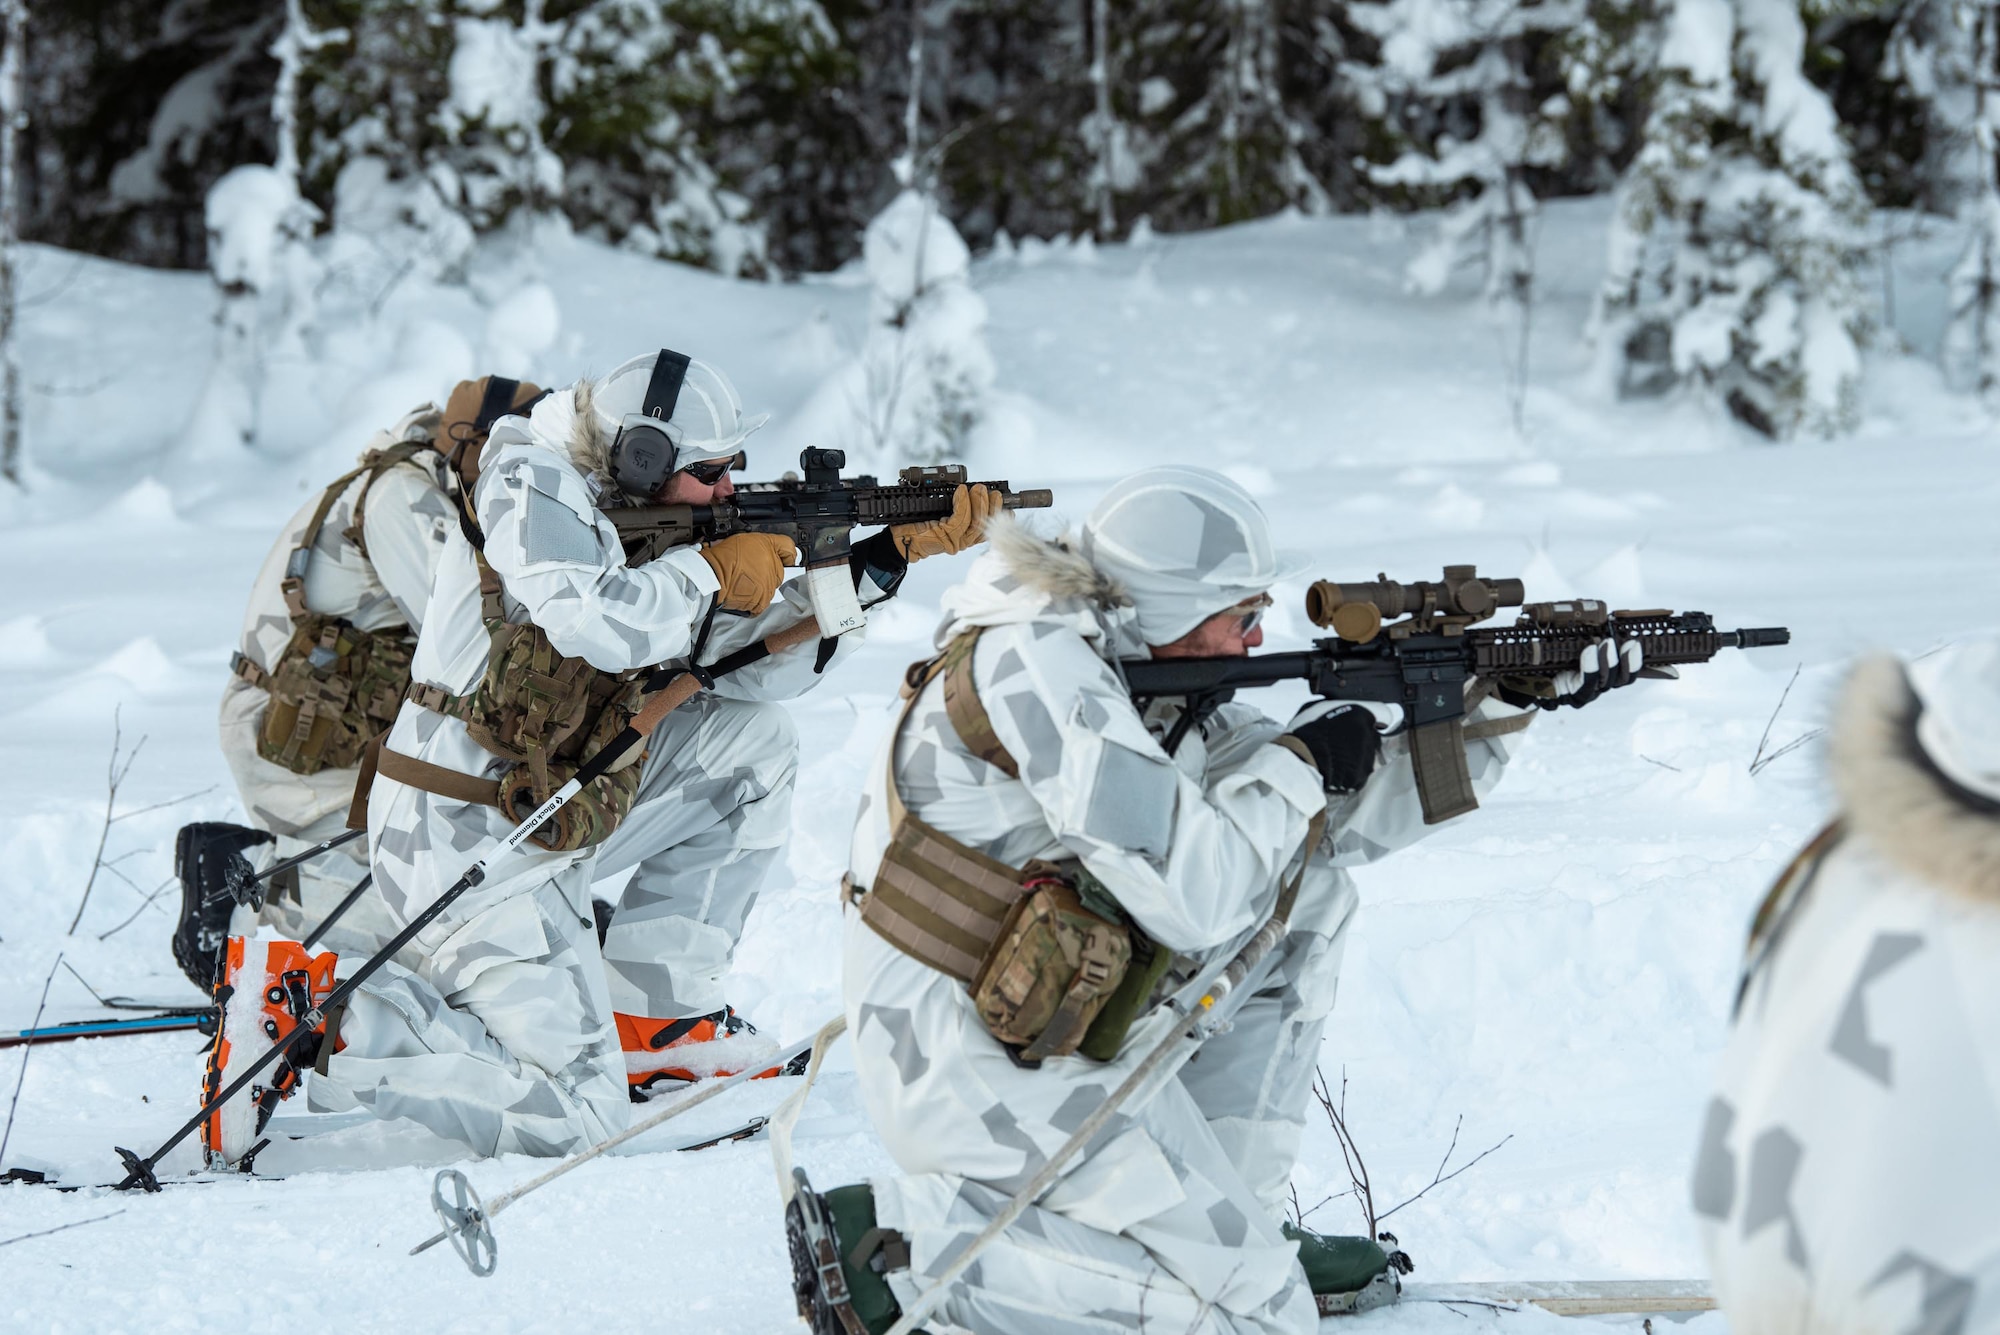 Airmen with the Kentucky Air National Guard’s 123rd Special Tactics Squadron fire their M4 rifles while on skis at a range in Grubbnäsudden, Sweden, Jan. 13, 2022. Fifteen members from the 123rd STS came to Sweden to build on their relationship with European partners during an arctic warfare training course.